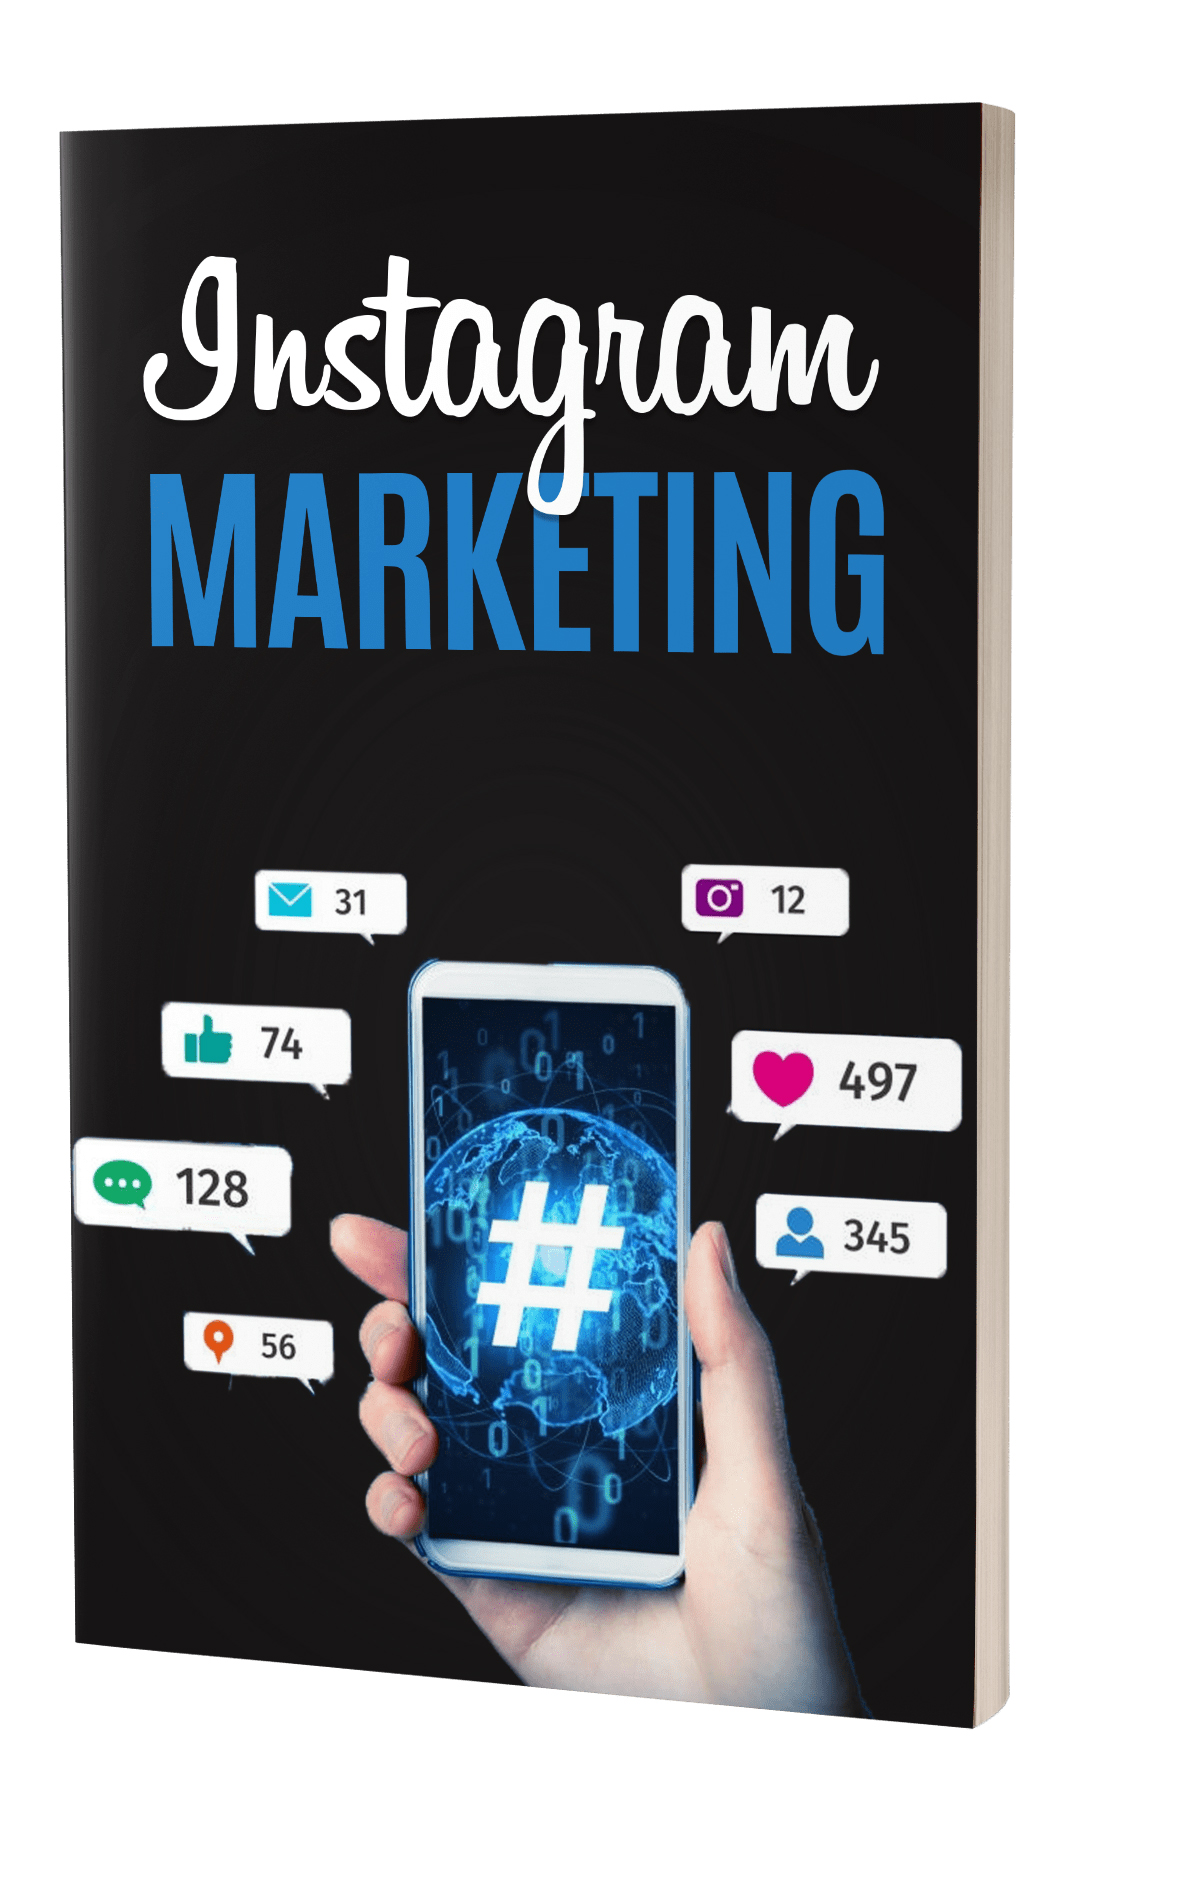 Cover of 'Instagram Marketing Essentials with Tekworld,' showcasing the starter guide and video series for newcomers to Instagram marketing.